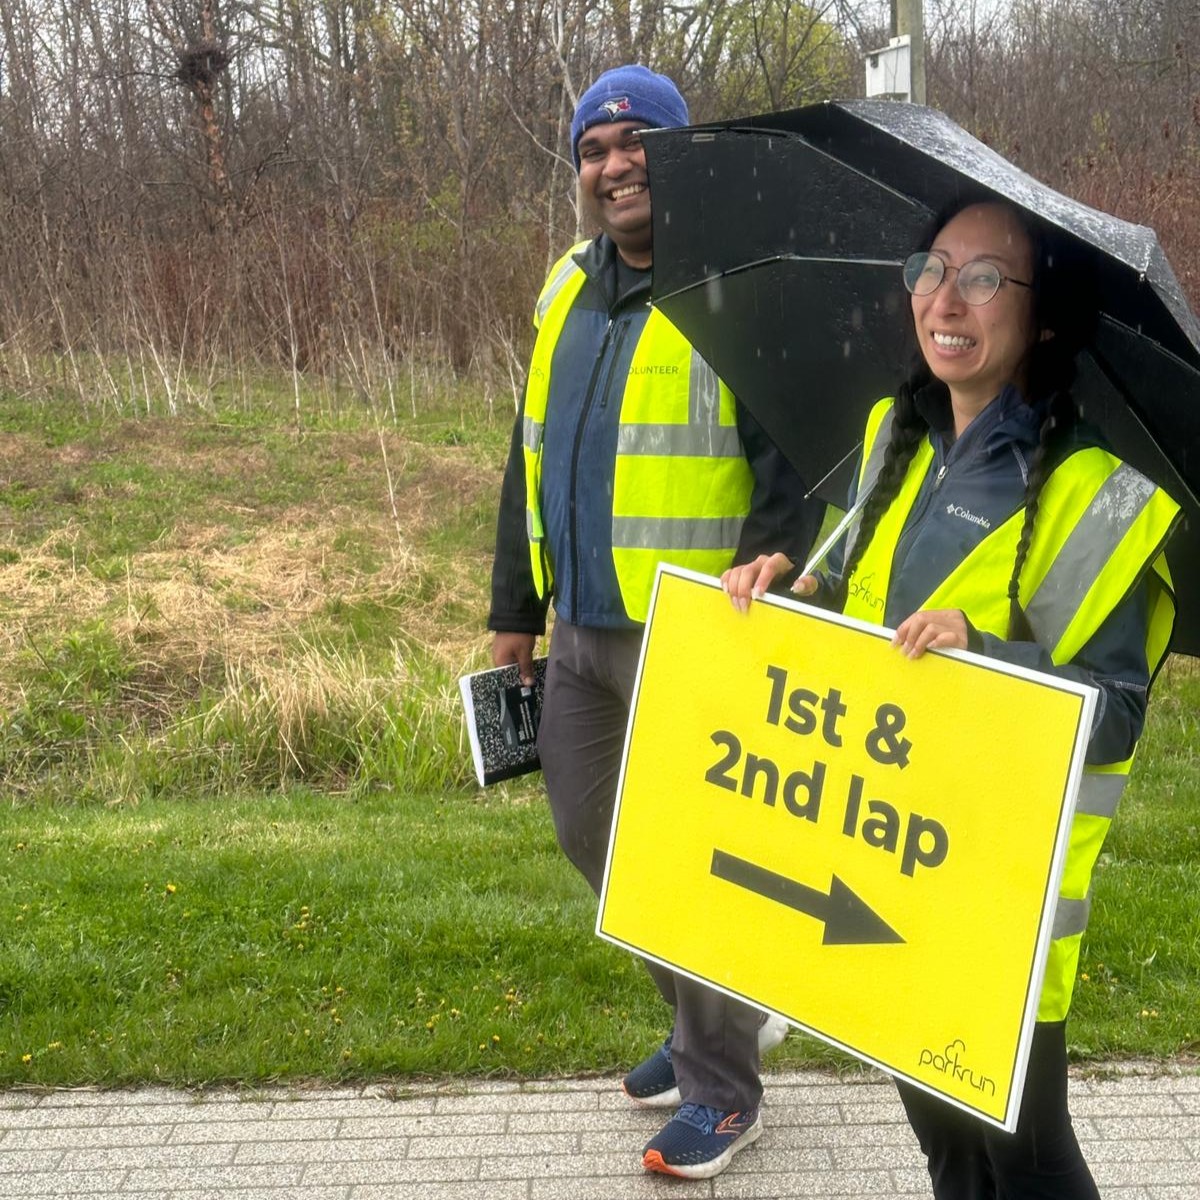 Volunteering is fun! If you have never volunteered at parkrun why not give it a try this week? Reach out to your local event for more information. 🌳 #loveparkrun